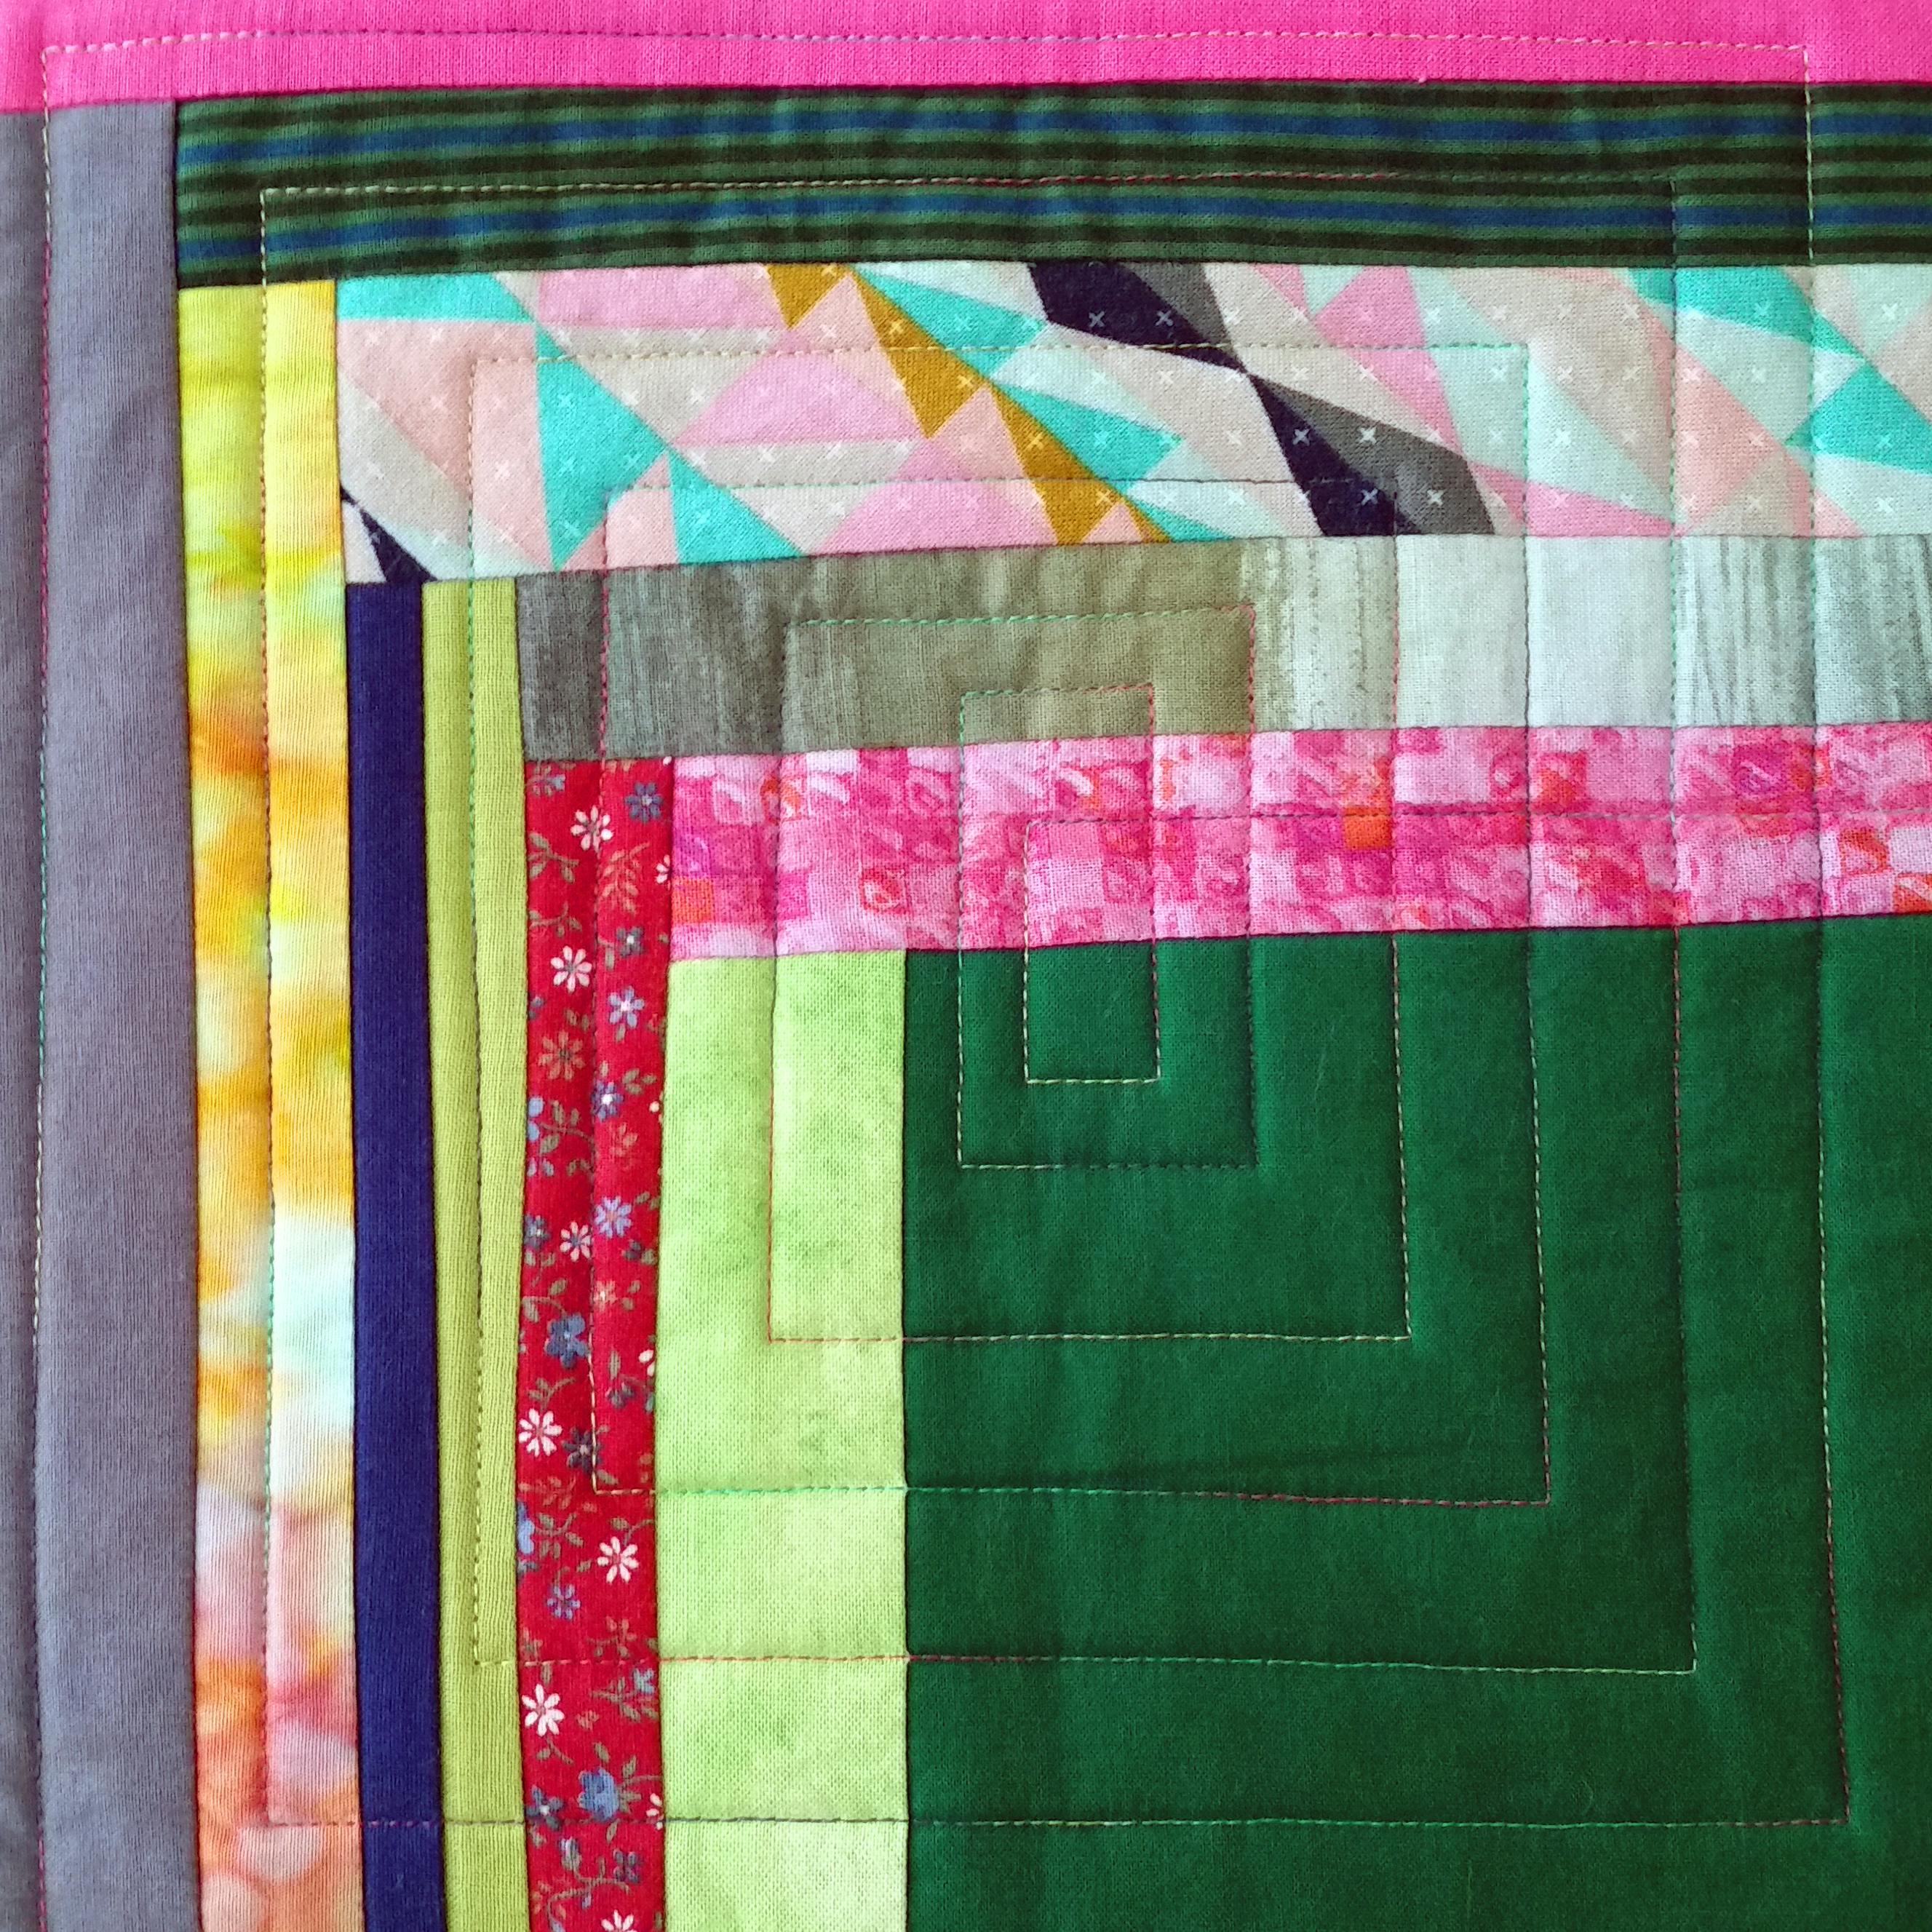 Closeup photo of a quilt block, with fabrics in green, pink, grey, and other colors.